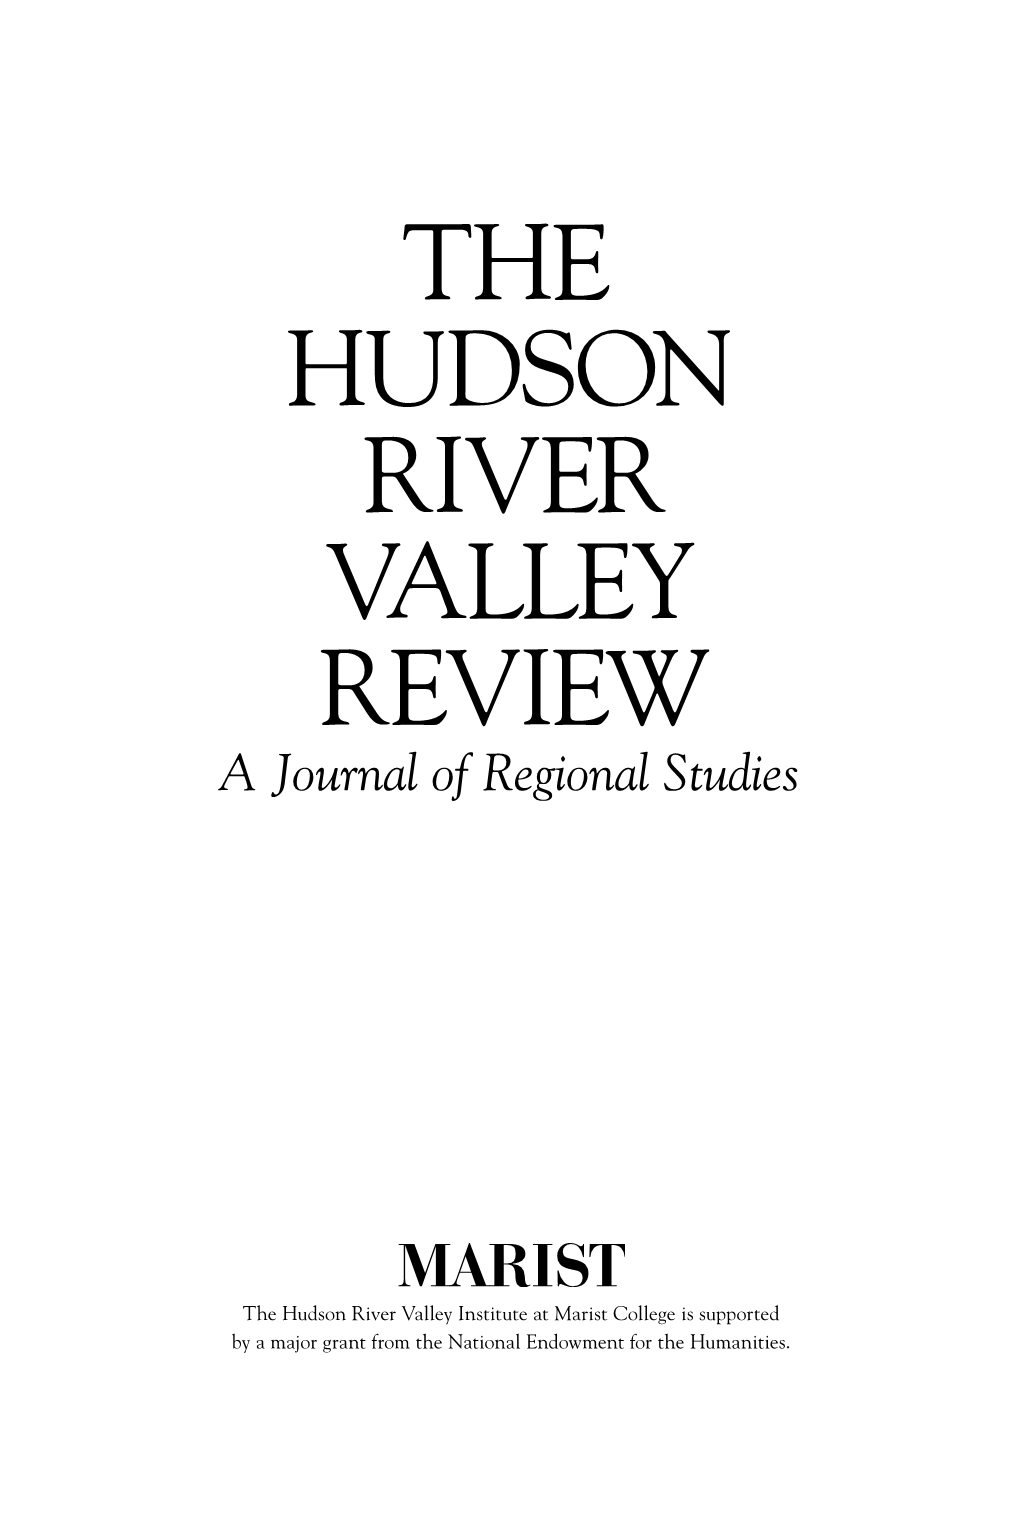 The Hudson River Valley Review a Journal of Regional Studies